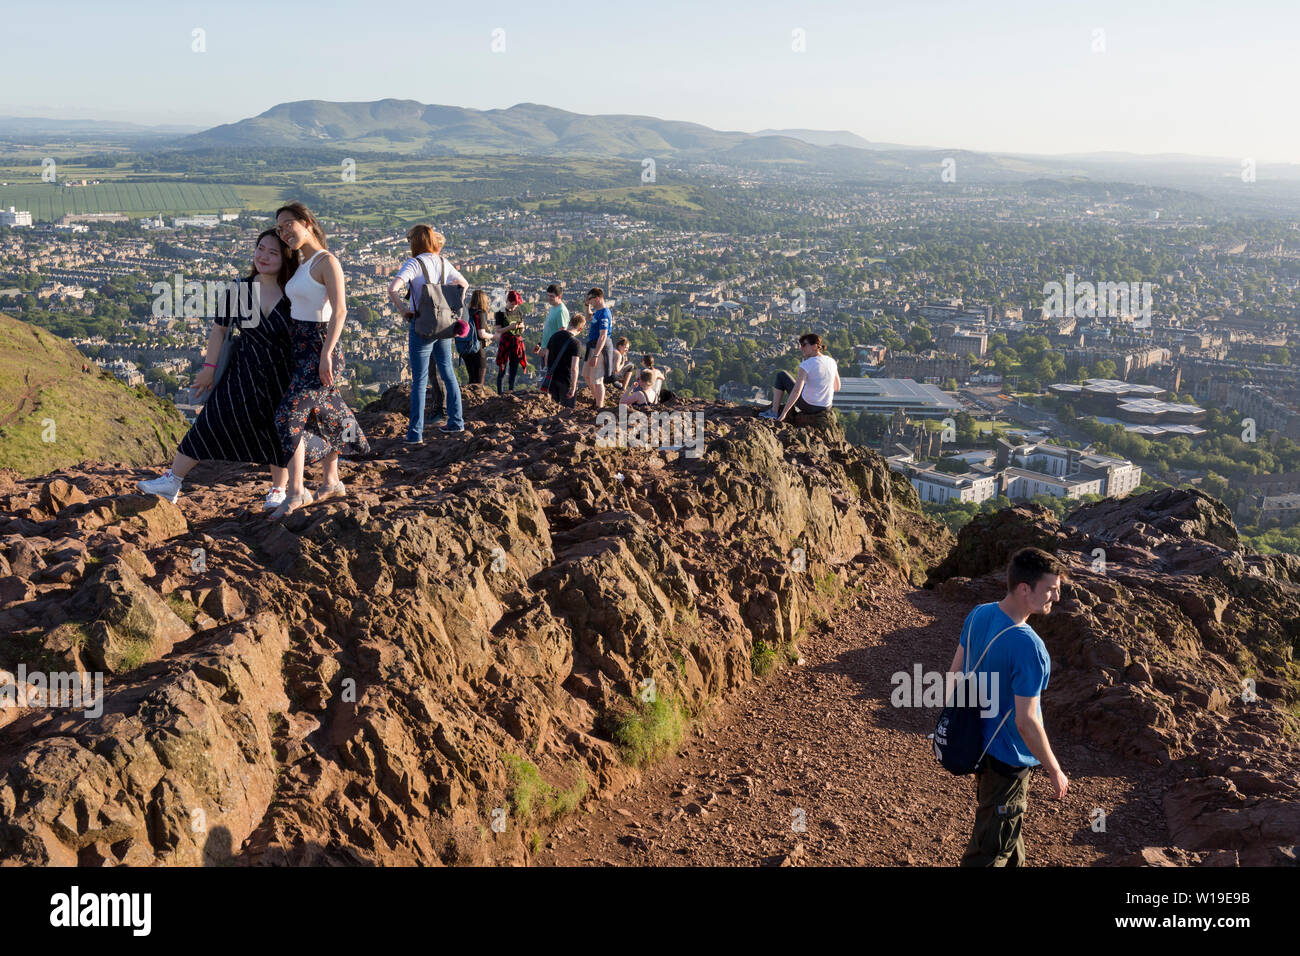 Walkers enjoy summer evening sunshine on the summit of Arthur's Seat in Holyrood Park, overlooking the city of Edinburgh, on 26th June 2019, in Edinburgh, Scotland. Arthur's Seat is an extinct volcano which is considered the main peak of the group of hills in Edinburgh, Scotland, which form most of Holyrood Park, described by Robert Louis Stevenson as 'a hill for magnitude, a mountain in virtue of its bold design'. The hill rises above the city to a height of 250.5 m (822 ft), providing excellent panoramic views of the city and beyond. Stock Photo